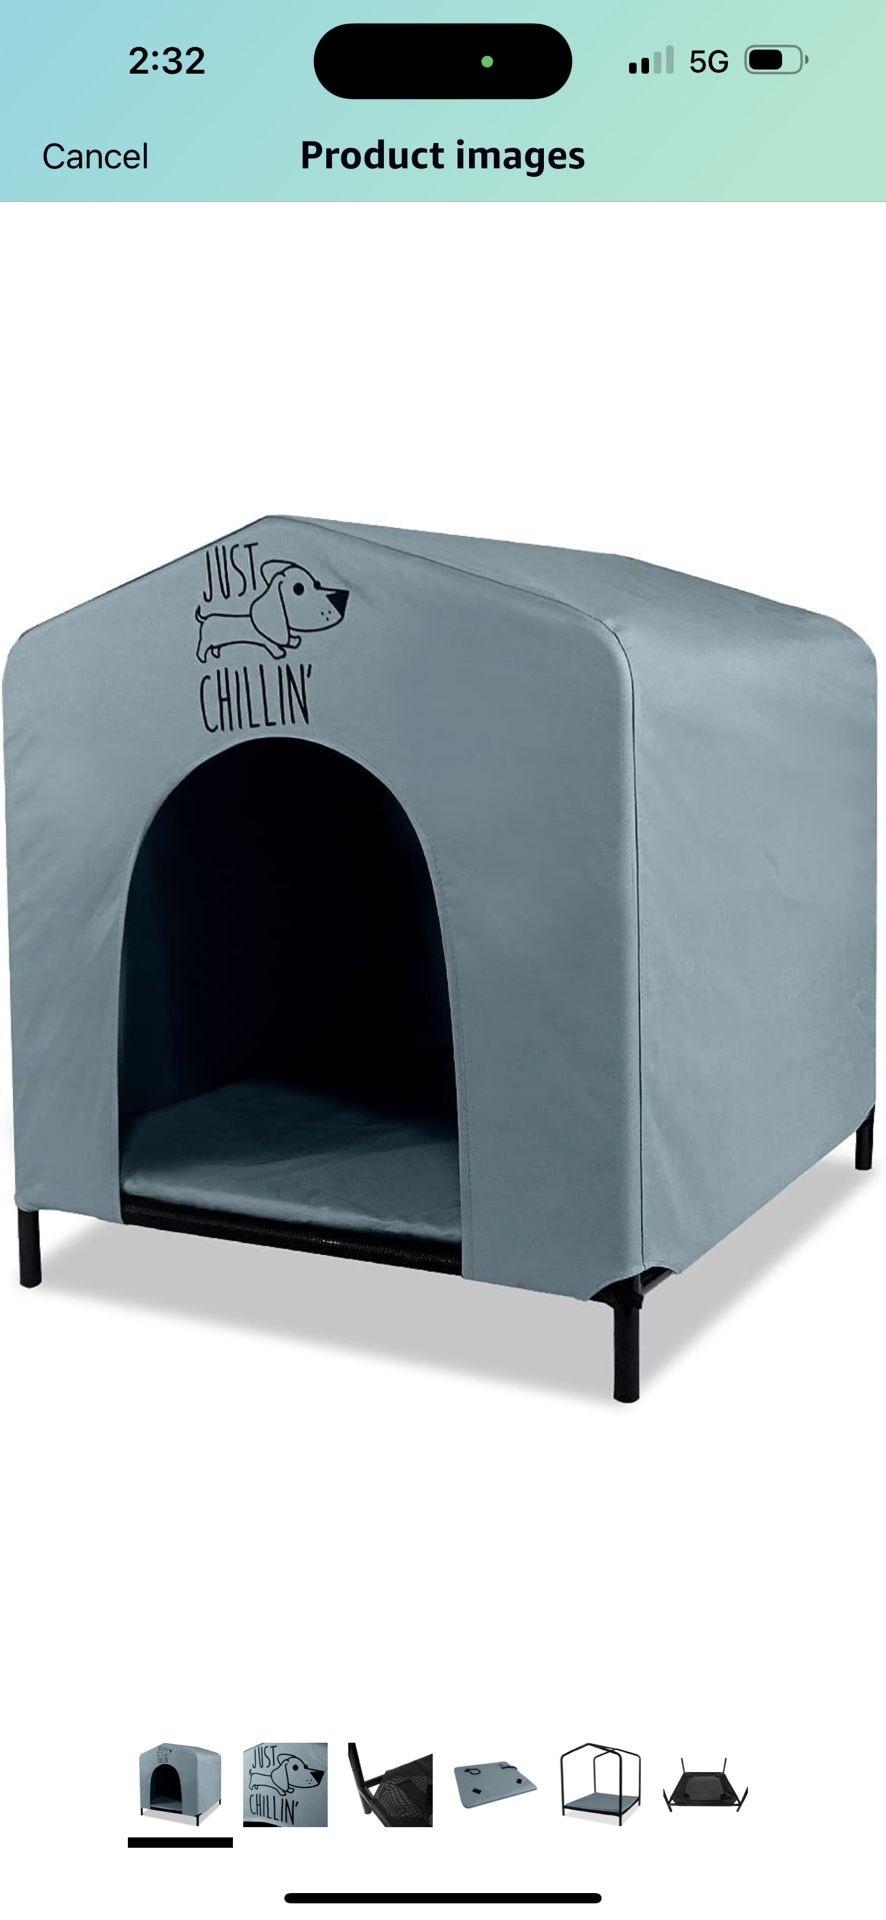 Floppy Dawg Just Chillin’ Portable Dog House. Elevated Pet Shelter for Indoor and Outdoor Use. Made of Water Resistant Breathable Oxford Fabric. Easy 